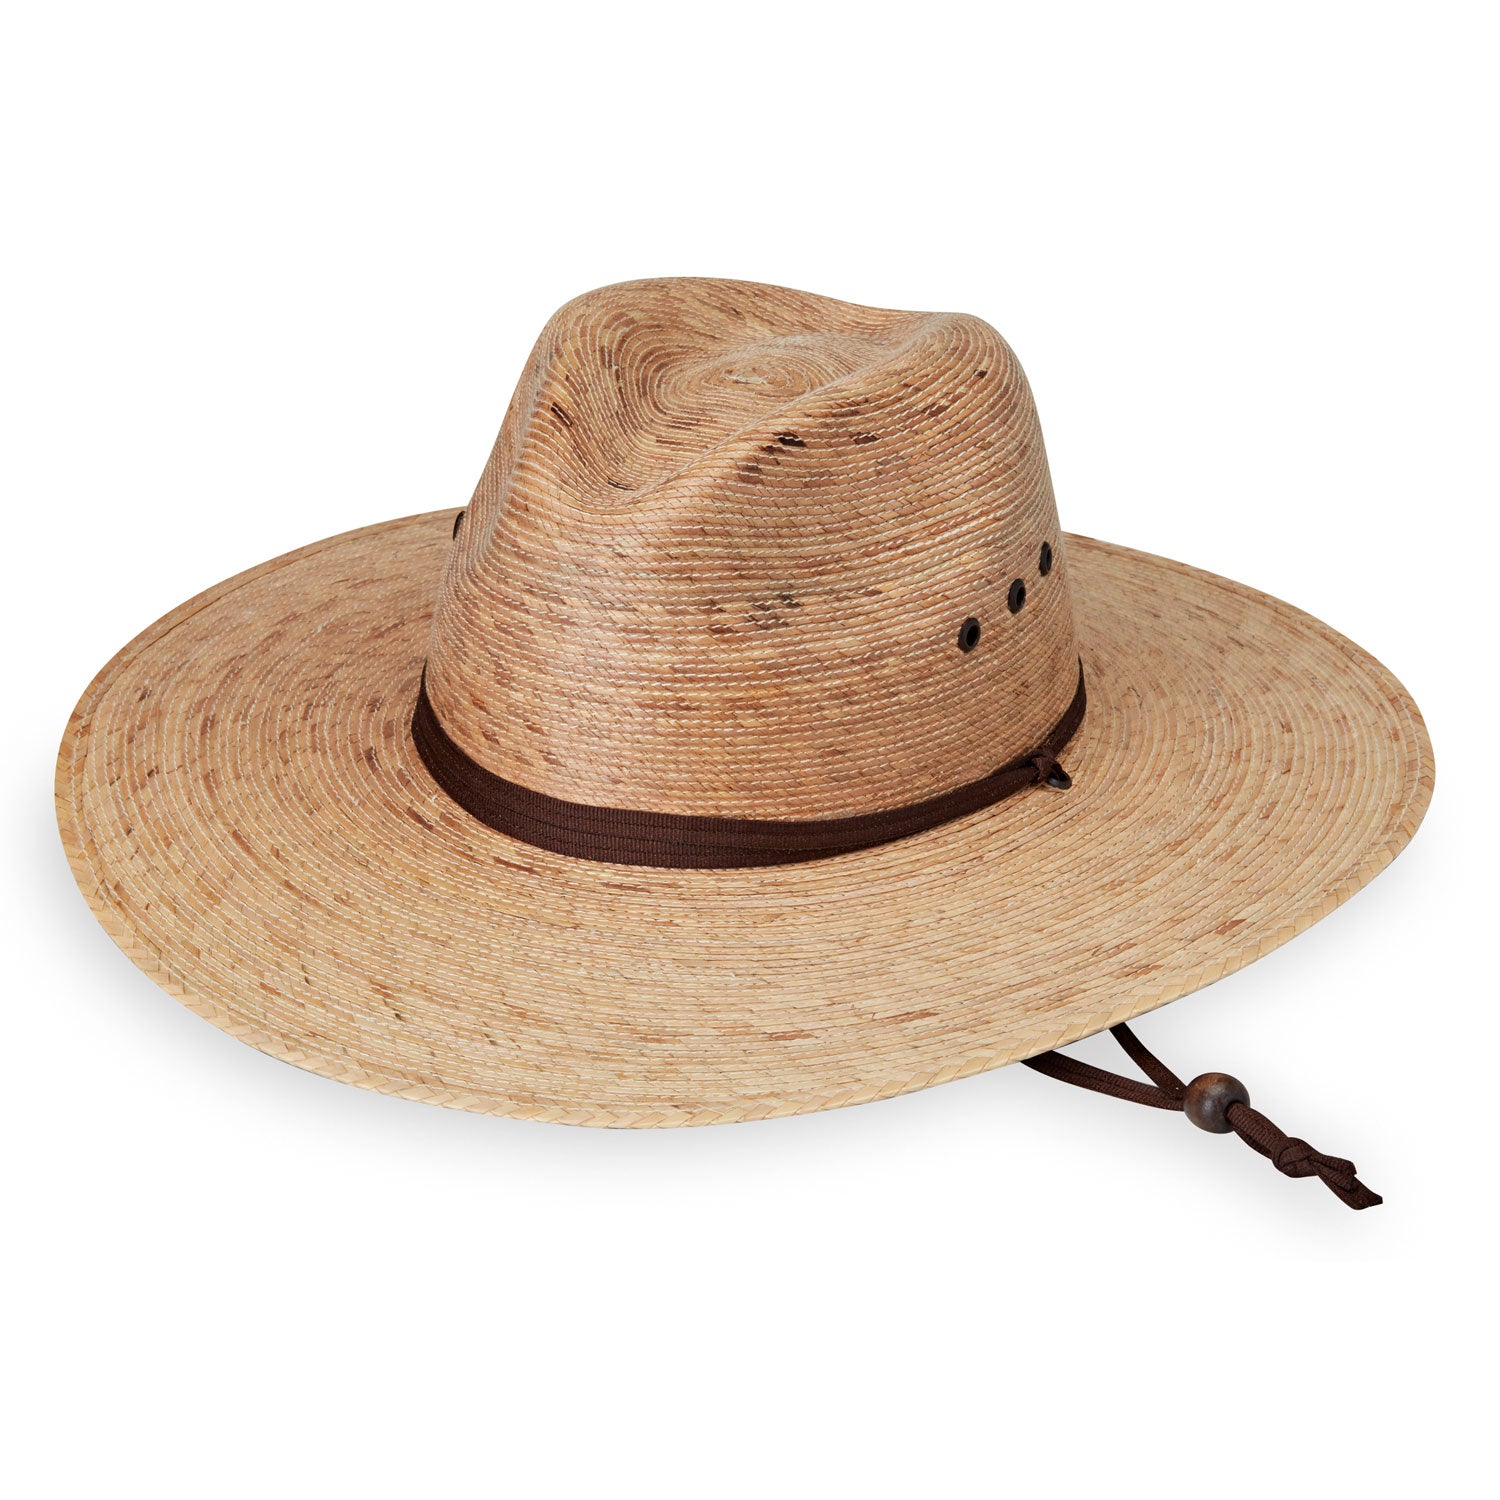 Featuring Unisex Fedora Style Baja UPF Sun Hat with Chinstrap in Camel from Wallaroo